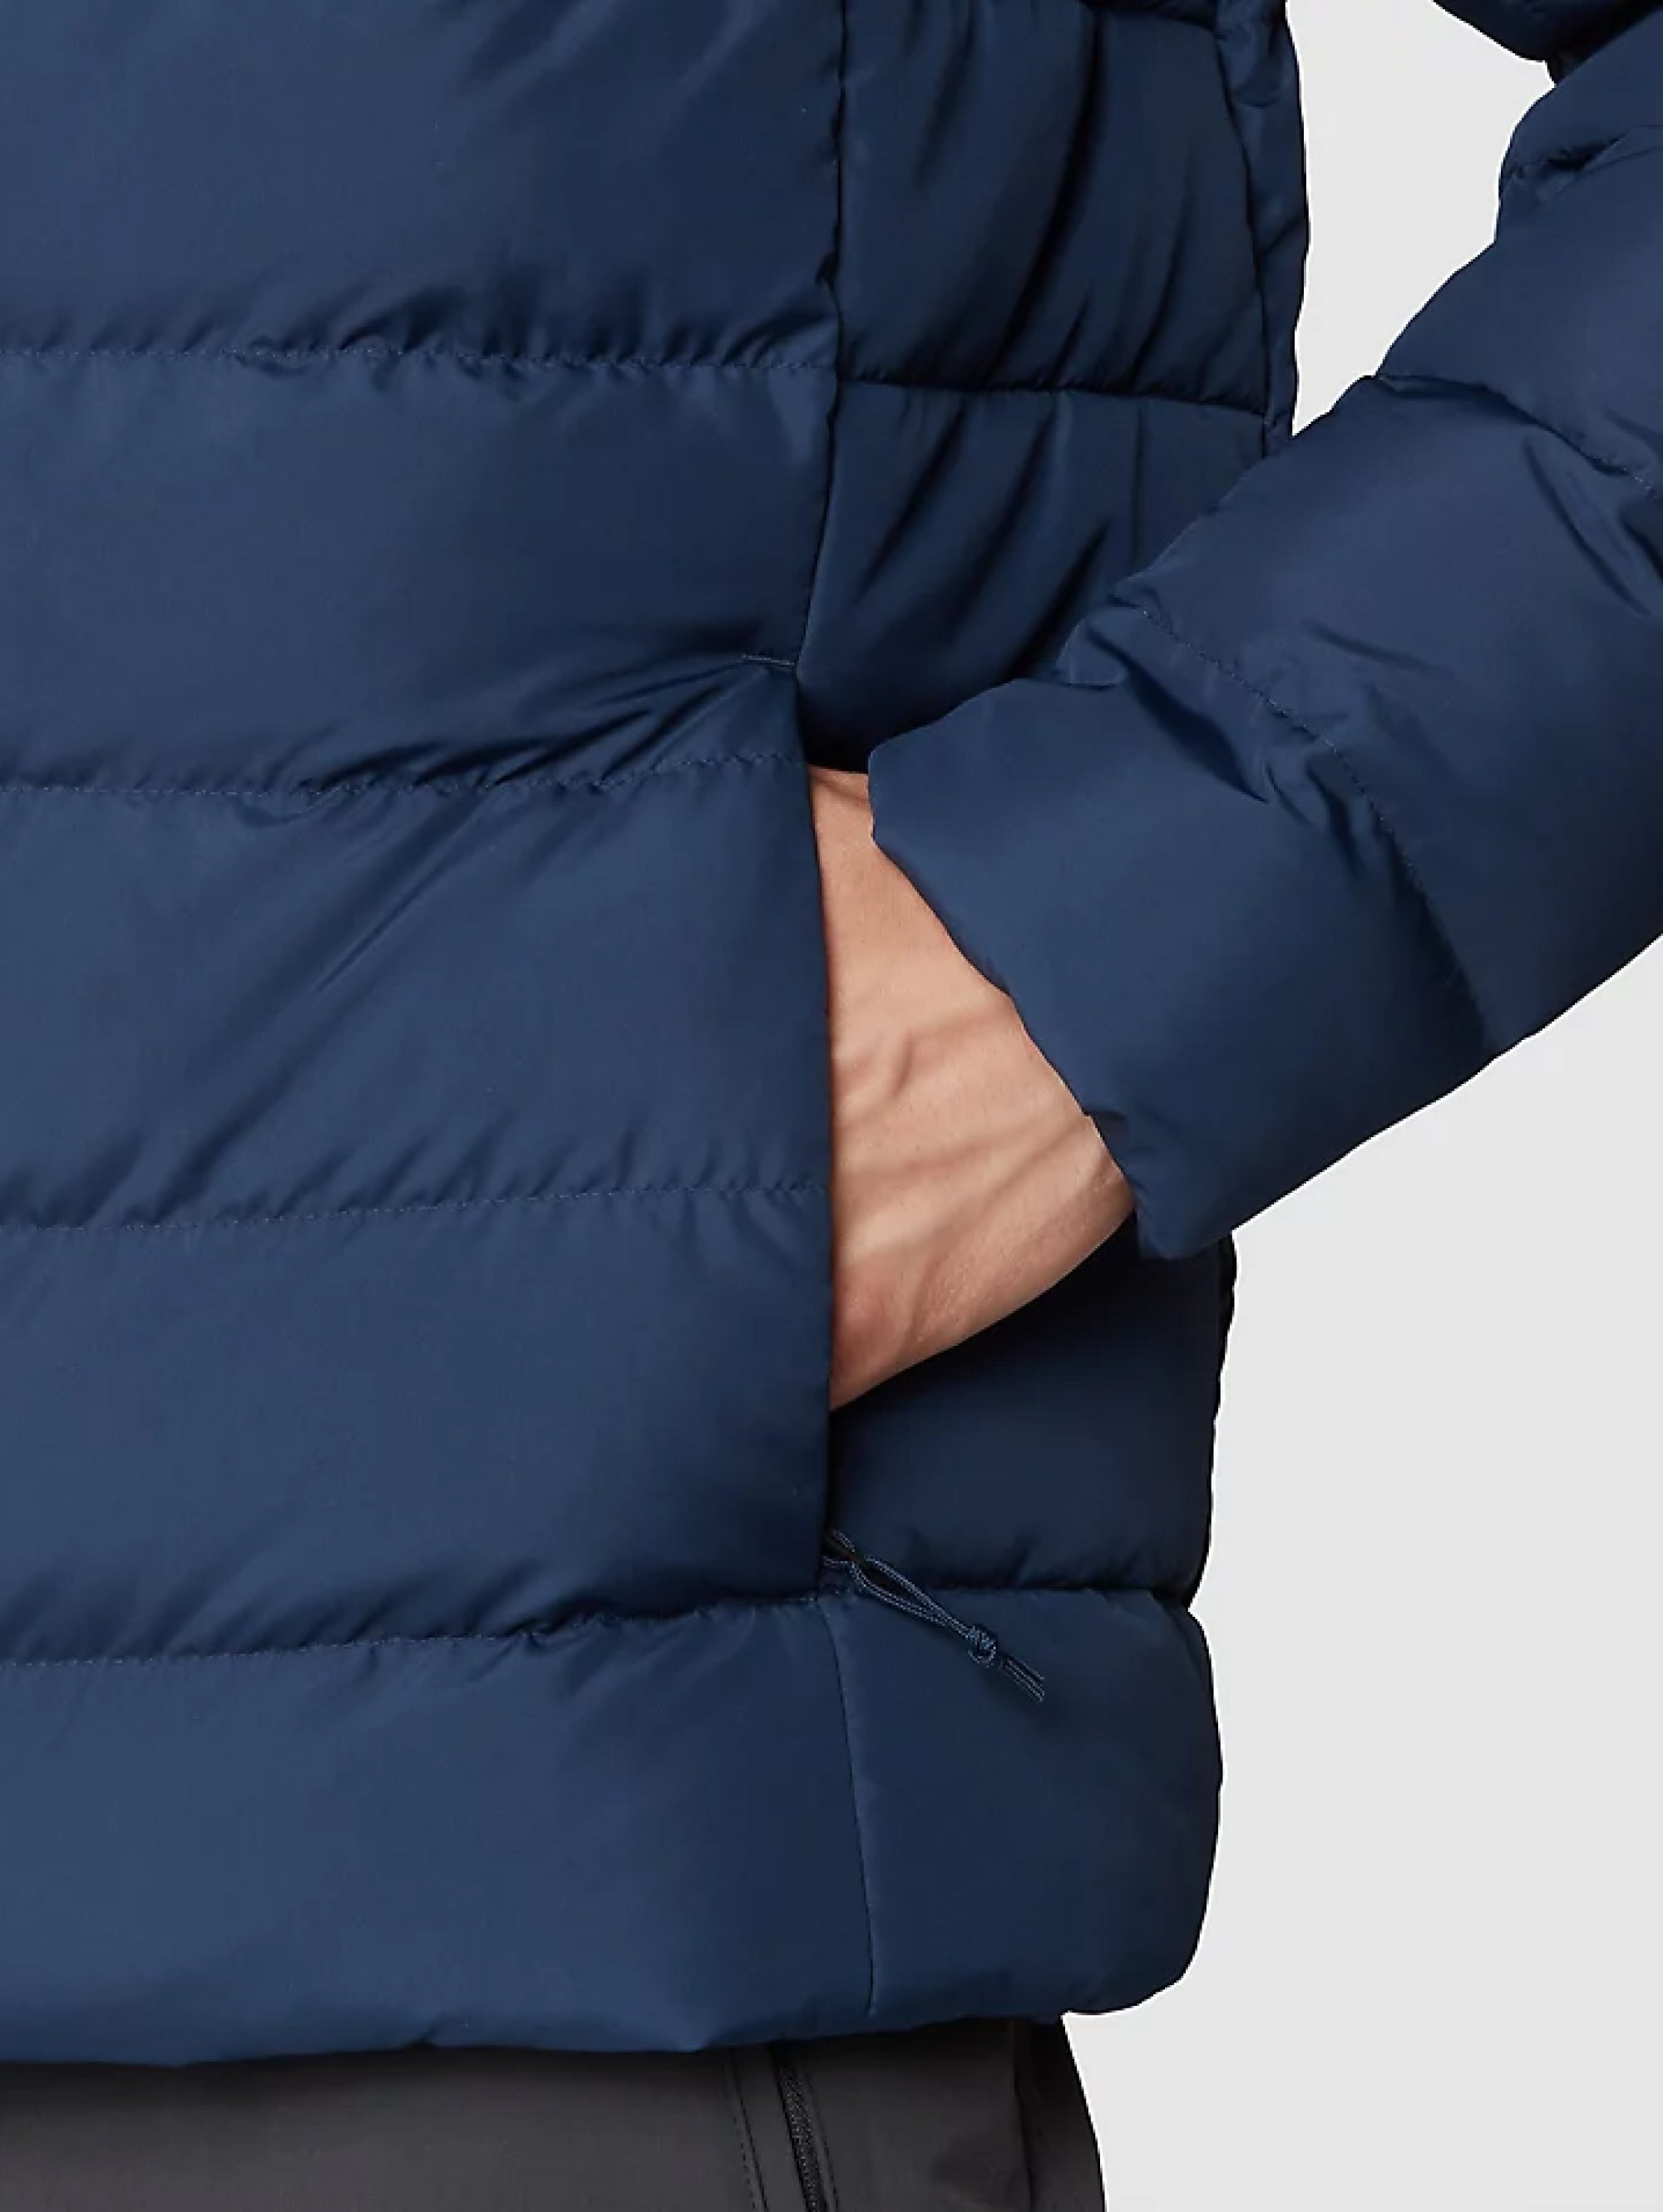 Navy blue Aconcagua down jacket with hood